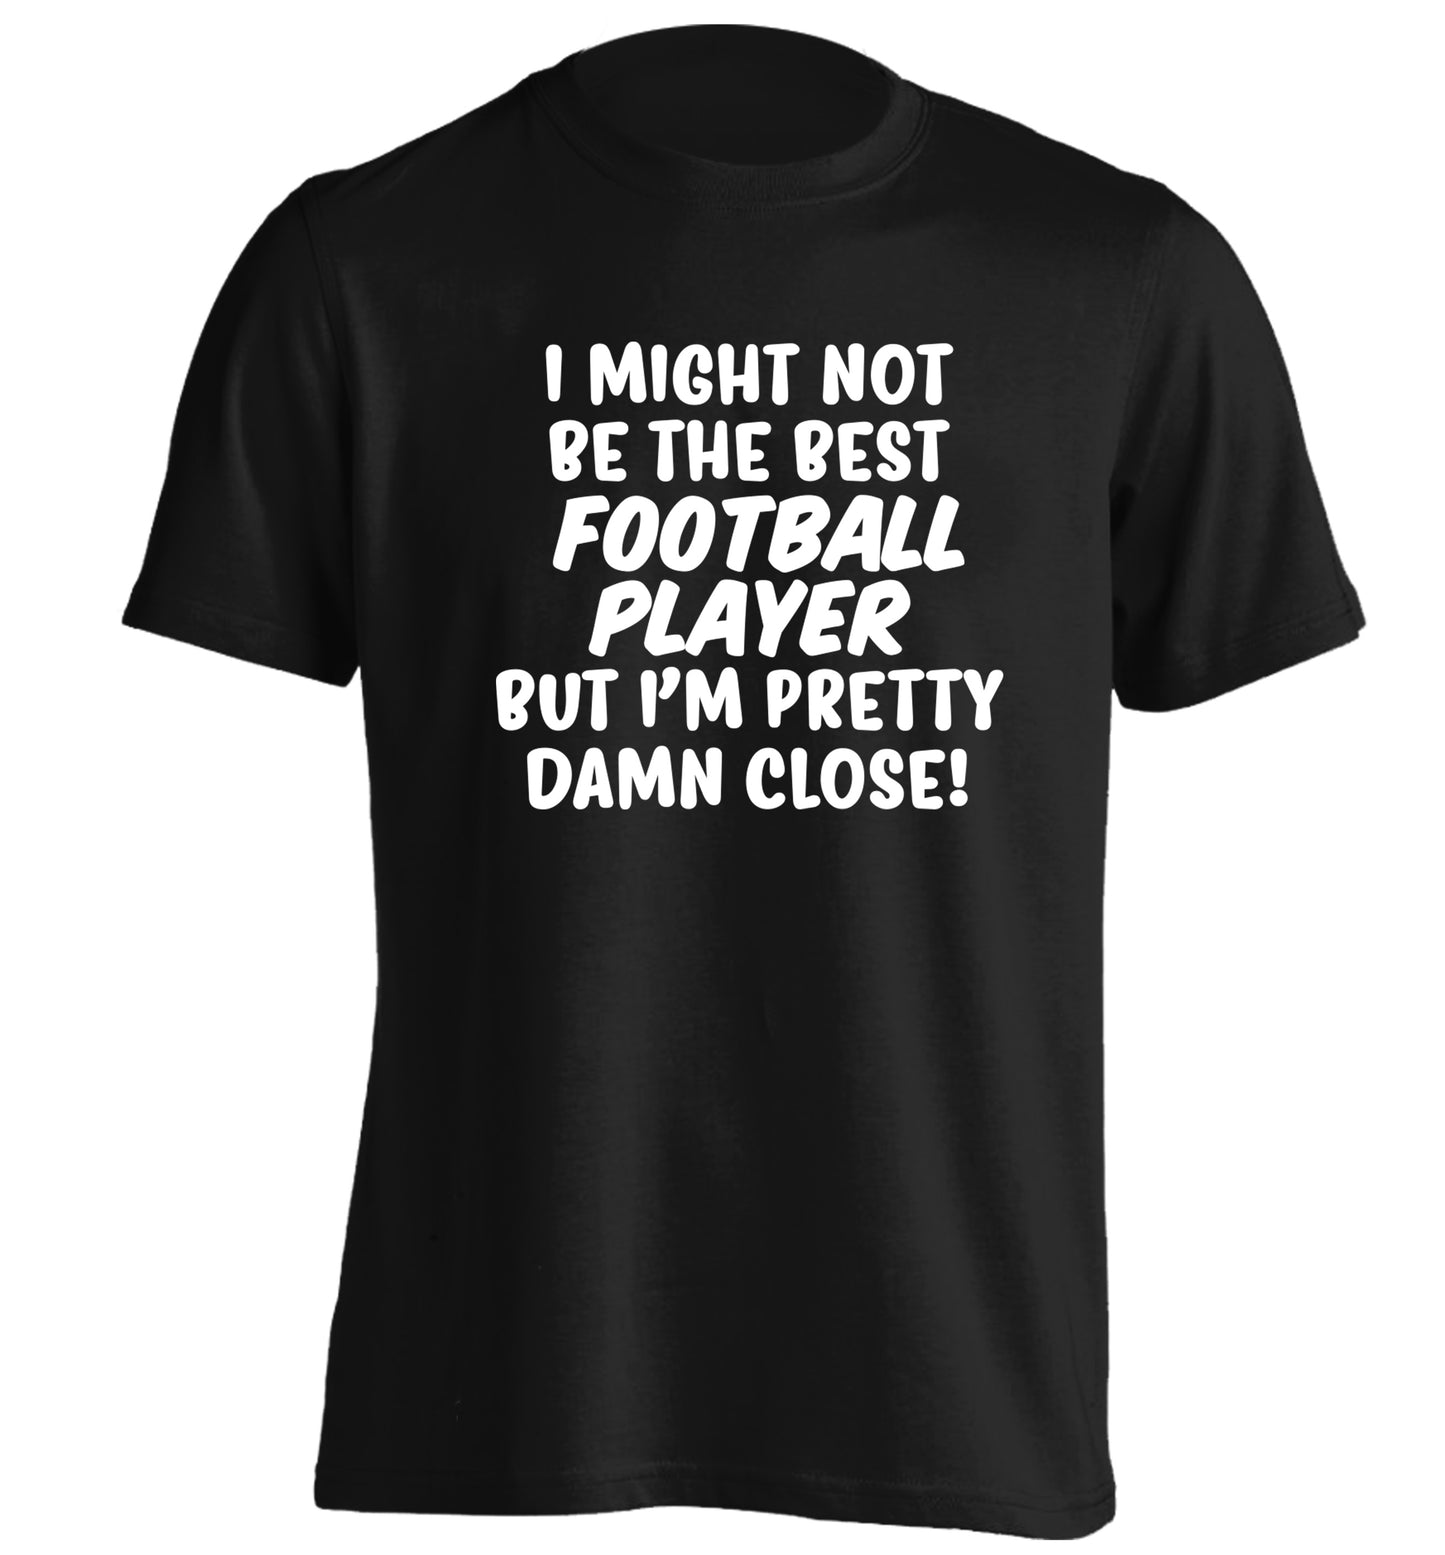 I might not be the best football player but I'm pretty close! adults unisexblack Tshirt 2XL